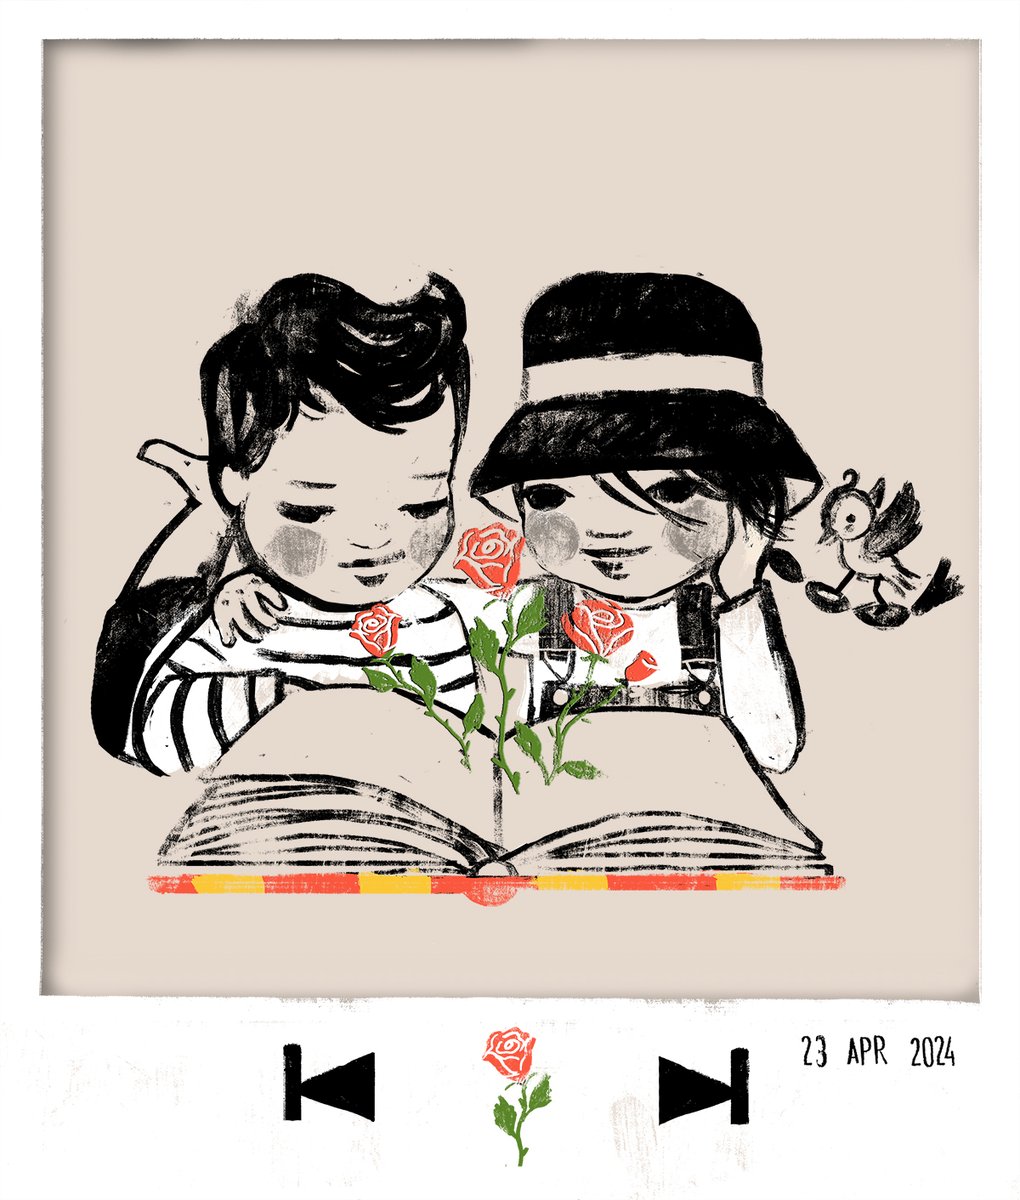 Feliç Sant Jordi! The day of books and roses, Catalonia streets all filled with roses and books...🌹📚🌹📚 Perfection! #homesick! It's surreal to think I ended up working on books ✨  Happy #WorldBookDay ! #kidlit #kidlitart #DiadaDeSantJordi #SantJordi2024